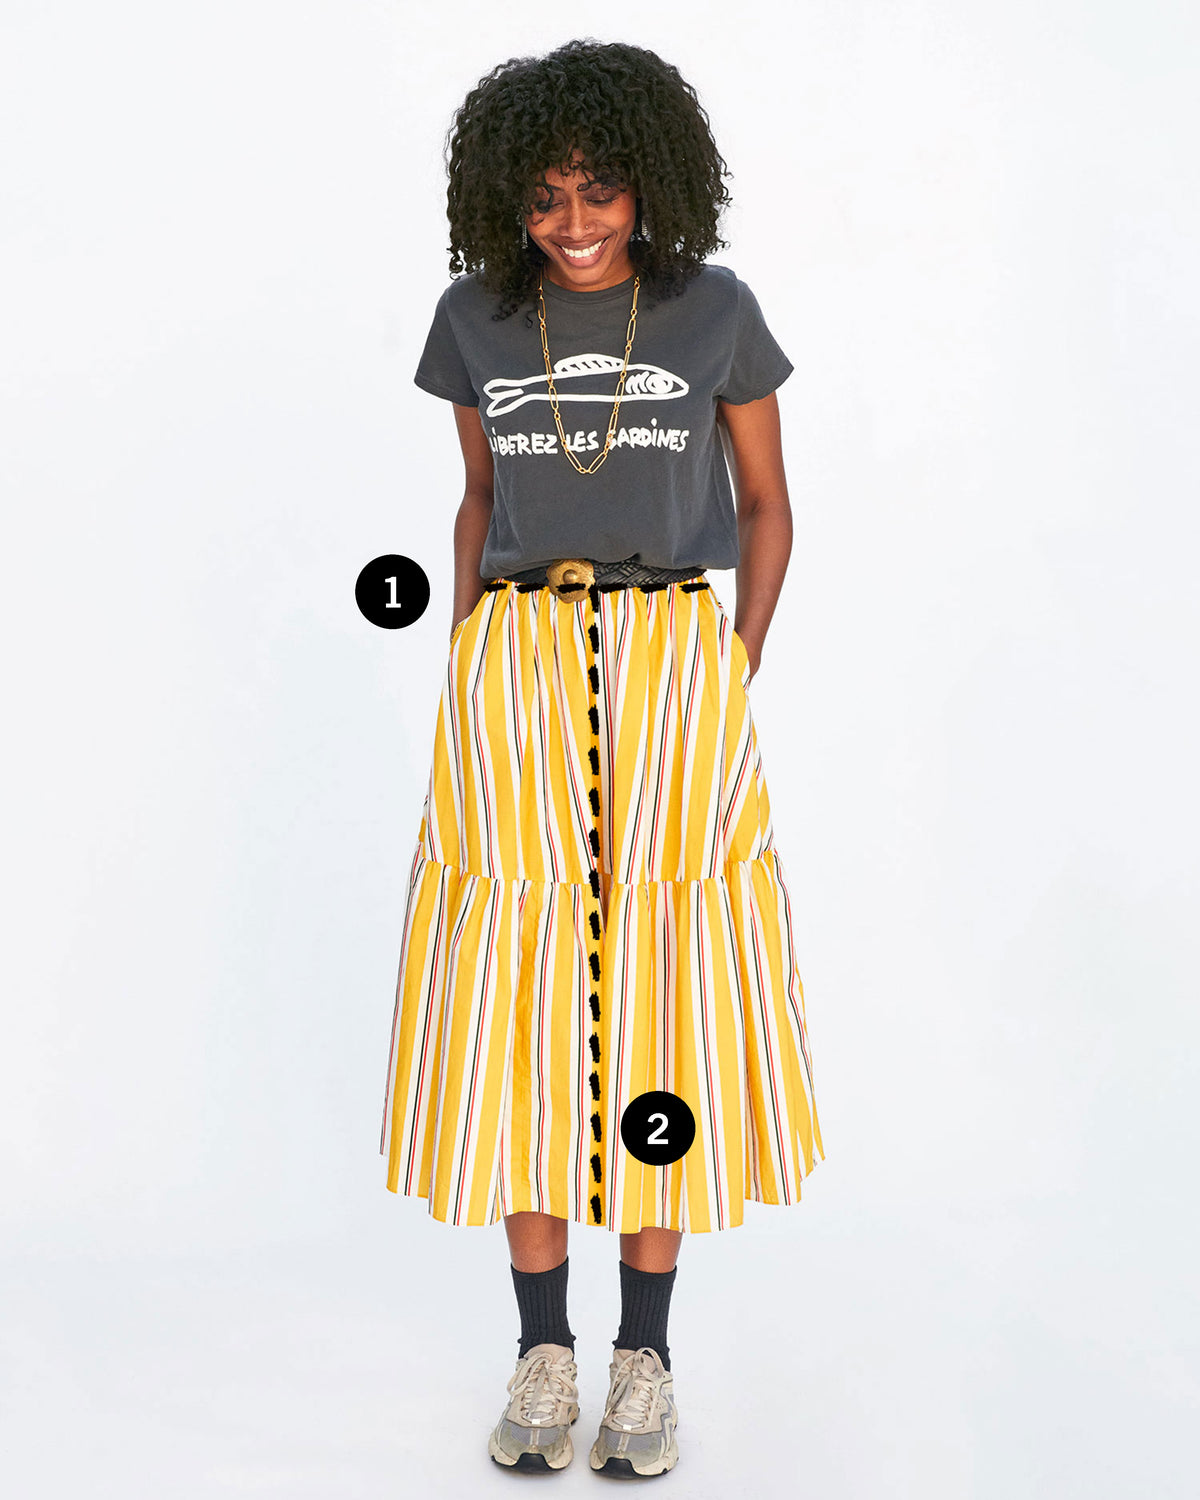 image of Mecca in a yellow skirt and a grey t-shirt with 2 lines depicting where the user should measure for their waist and length measurements in comparison to the garment